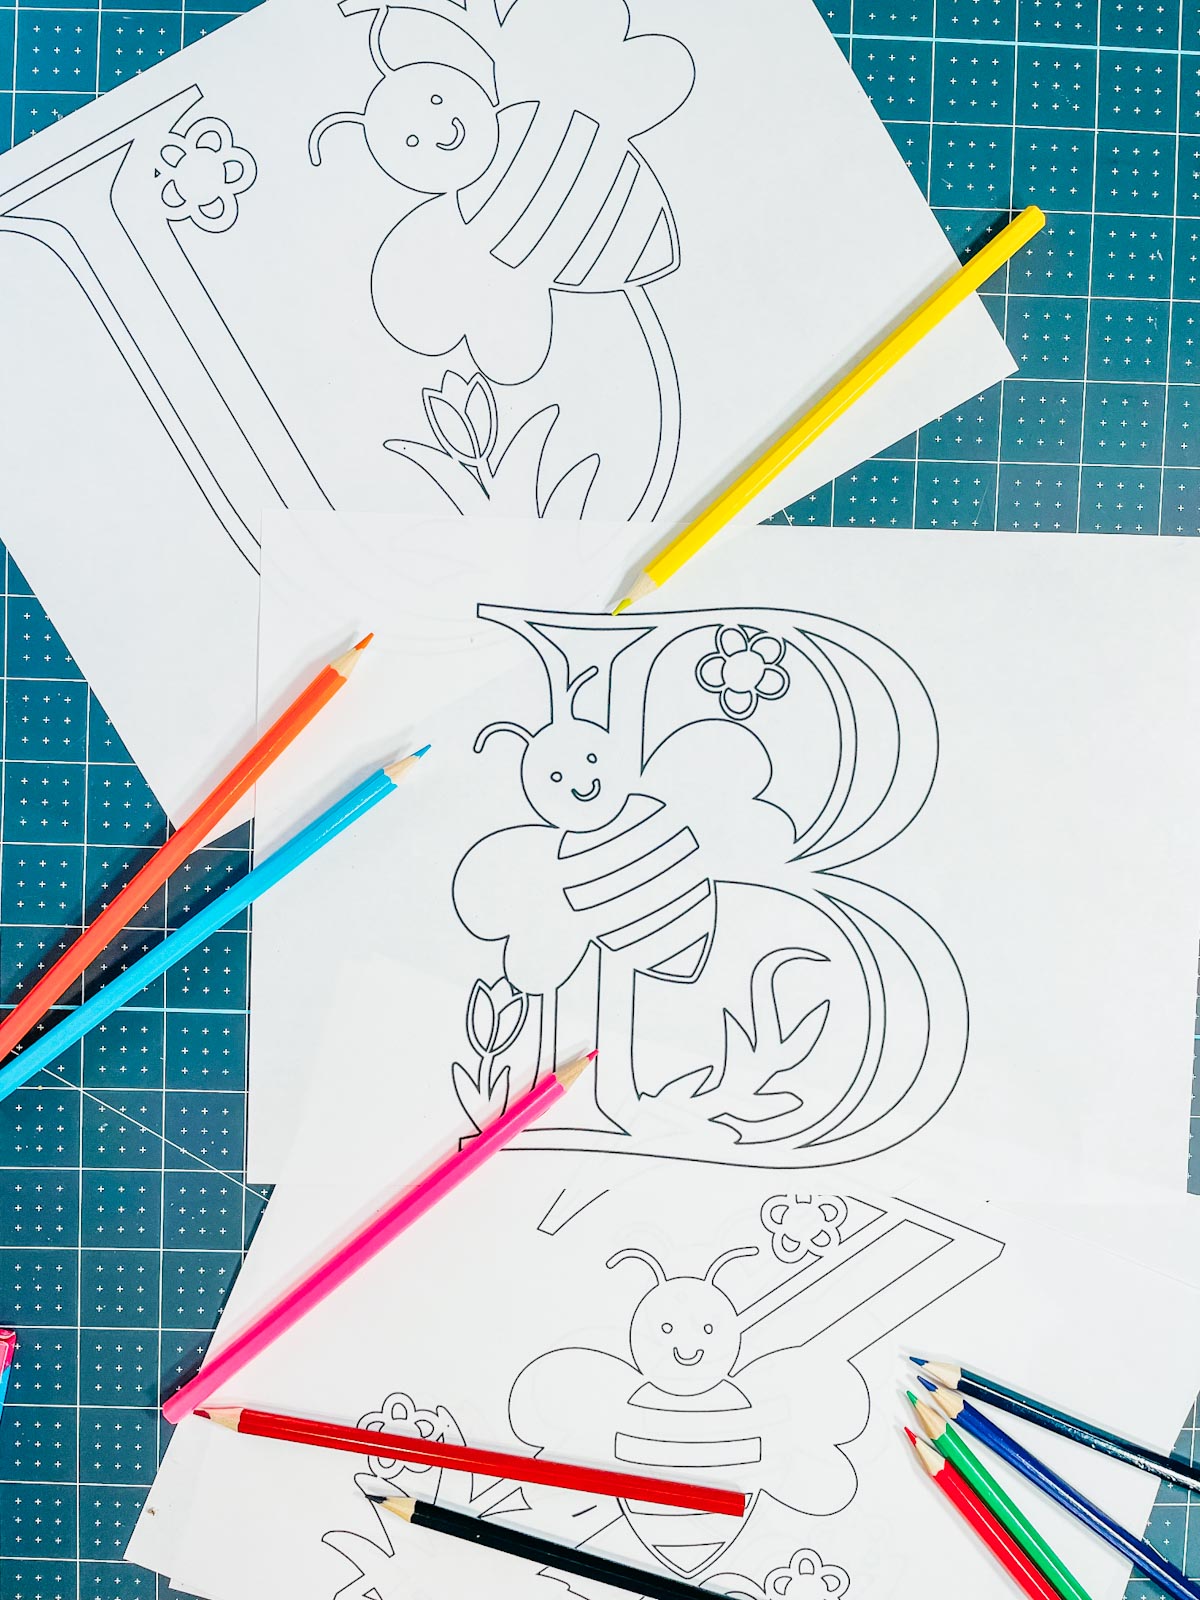 Bumble Bee Alphabet Colouring in Pages, DIY Party Favors for a Kid’s Birthday Party and Alternative Party Bag Ideas